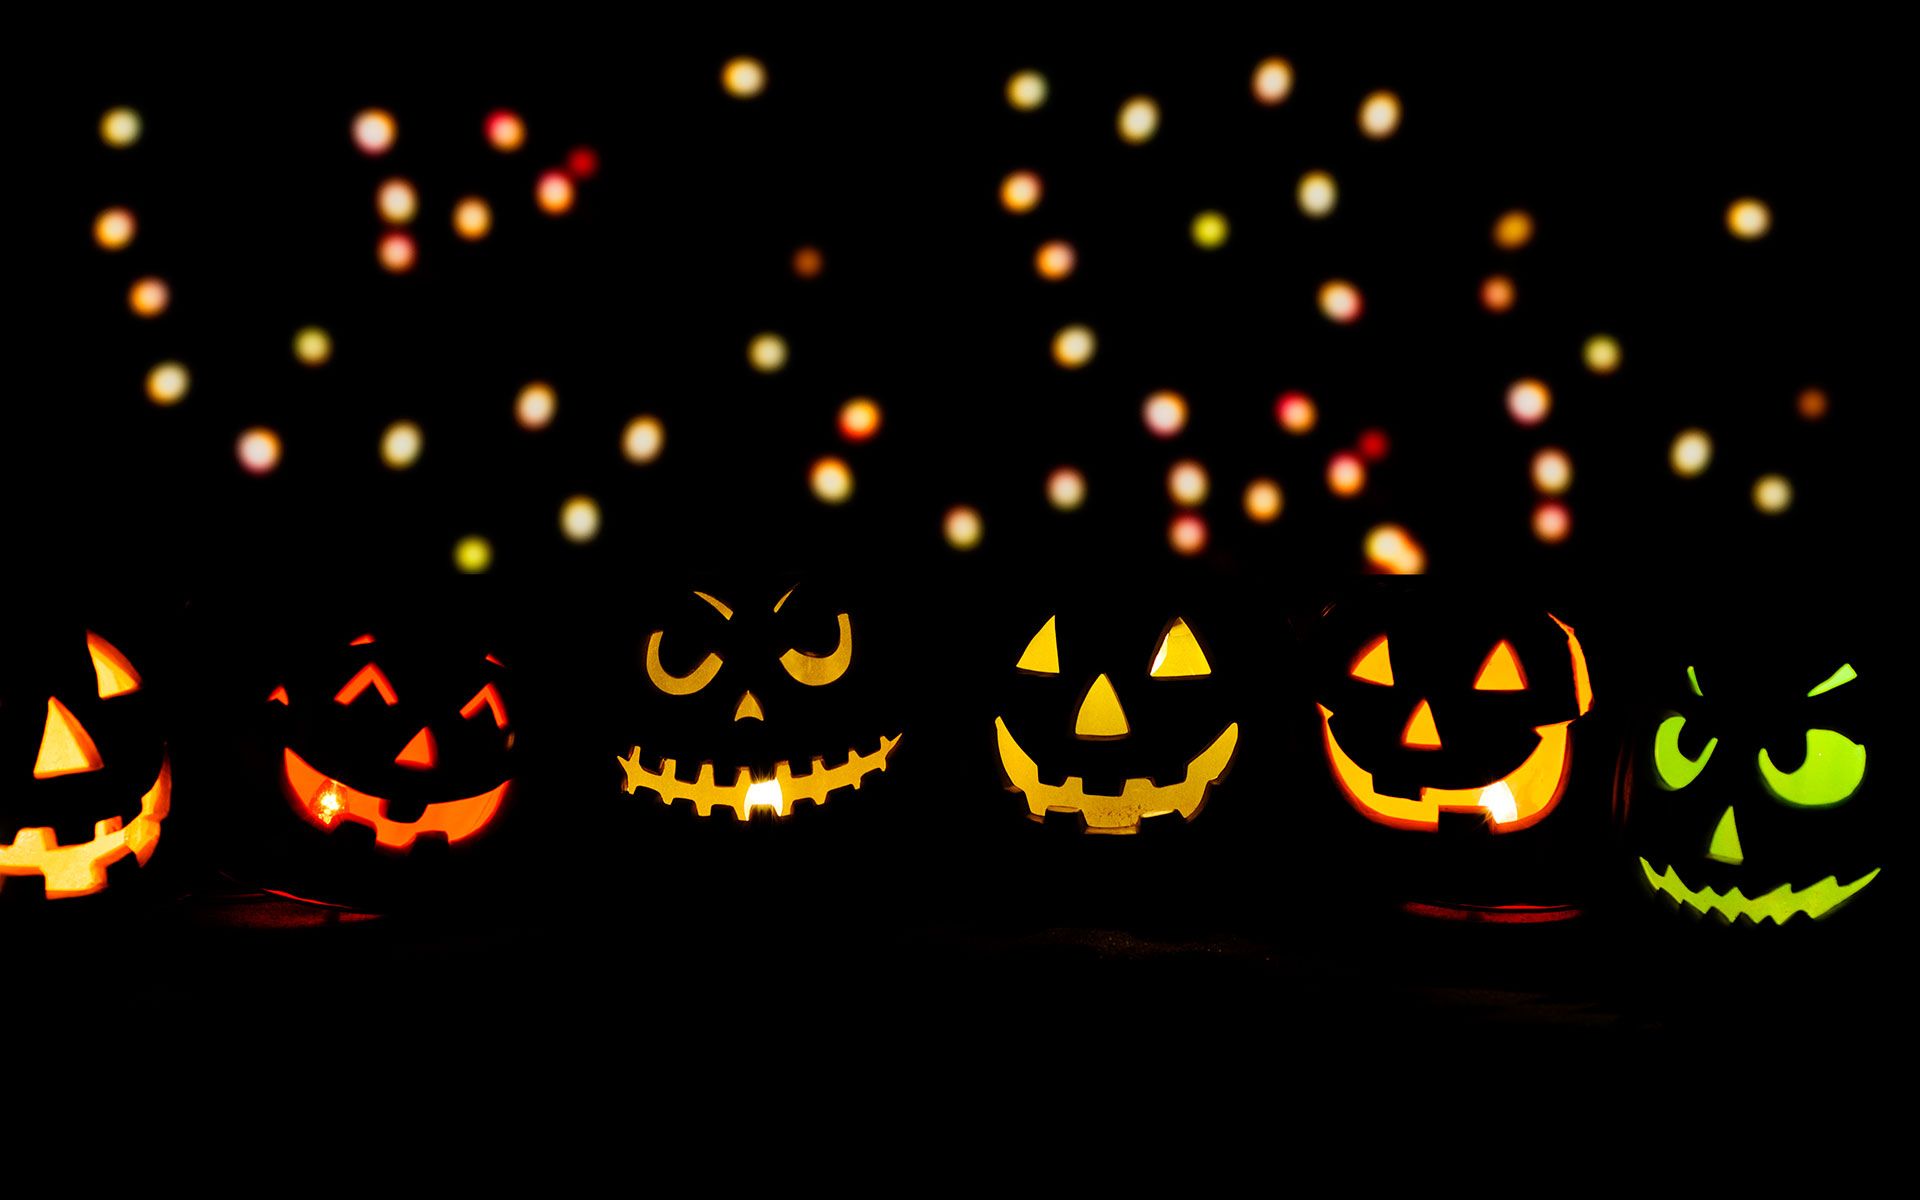 Stay hooked to us because more Halloween posts are coming up next to bedazzle you. Description from. Halloween pumpkin image, Halloween wallpaper, Cute halloween